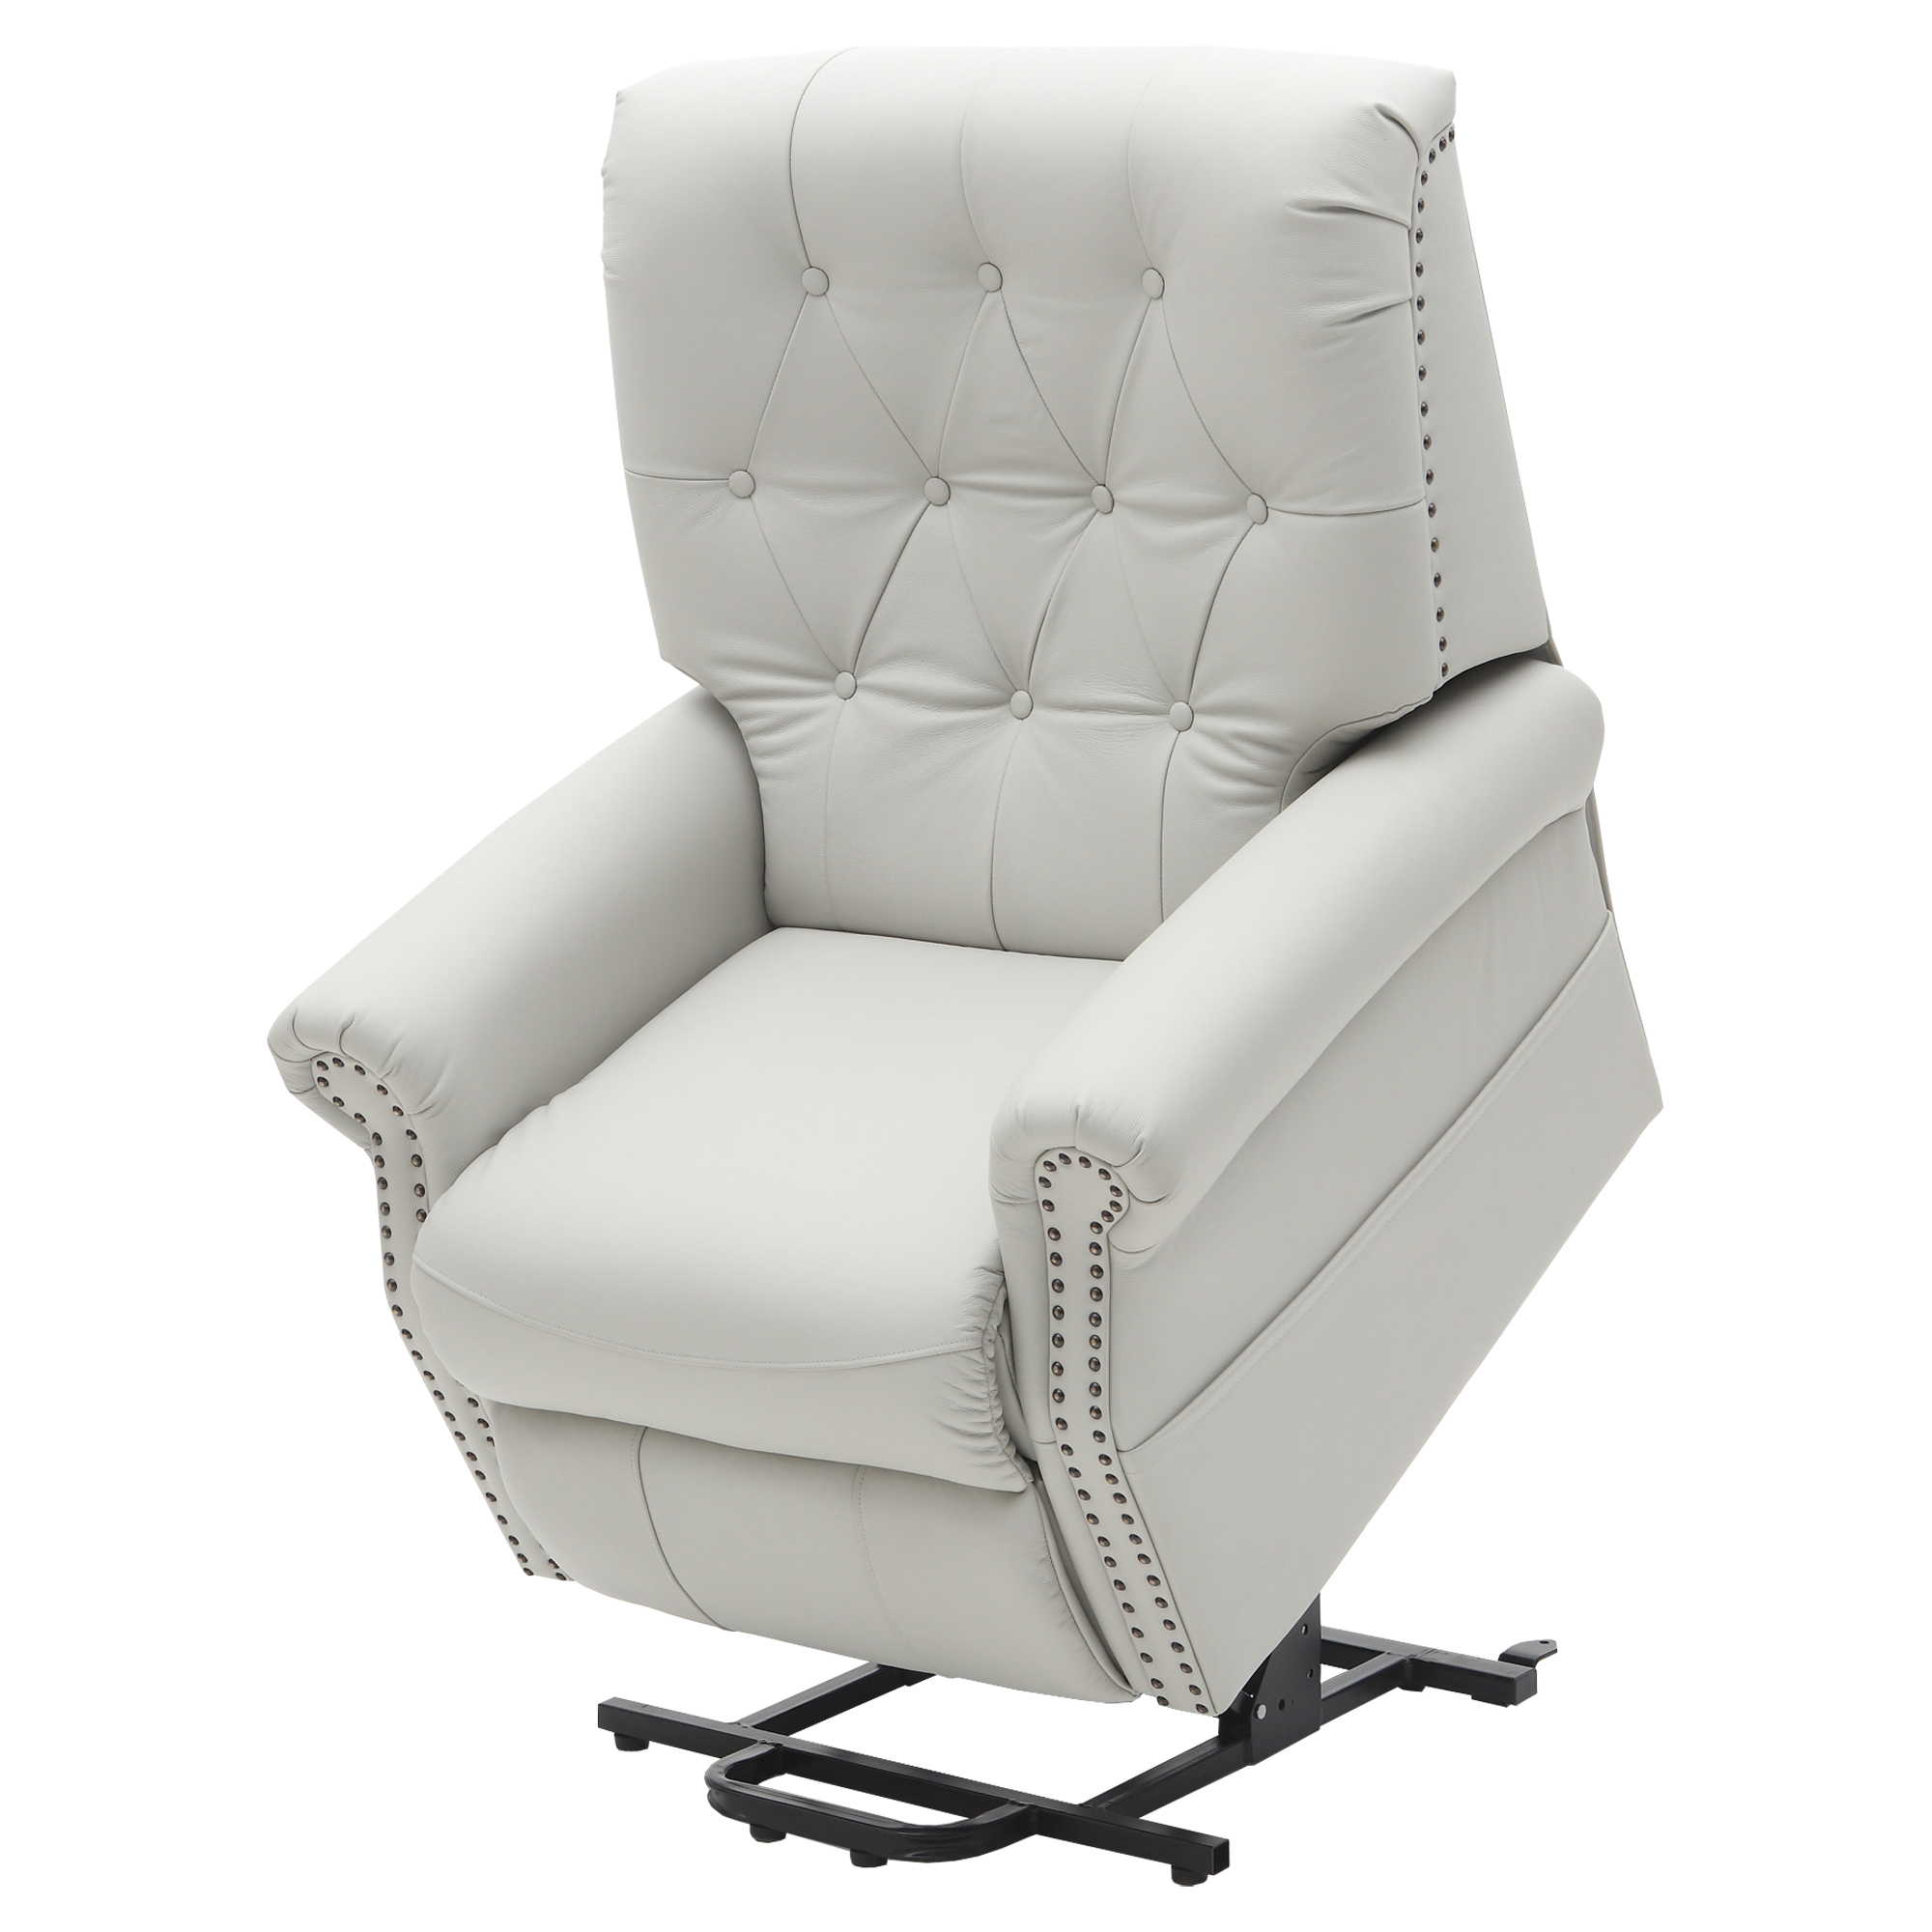 CH4018 Neptune Lift Chair Image